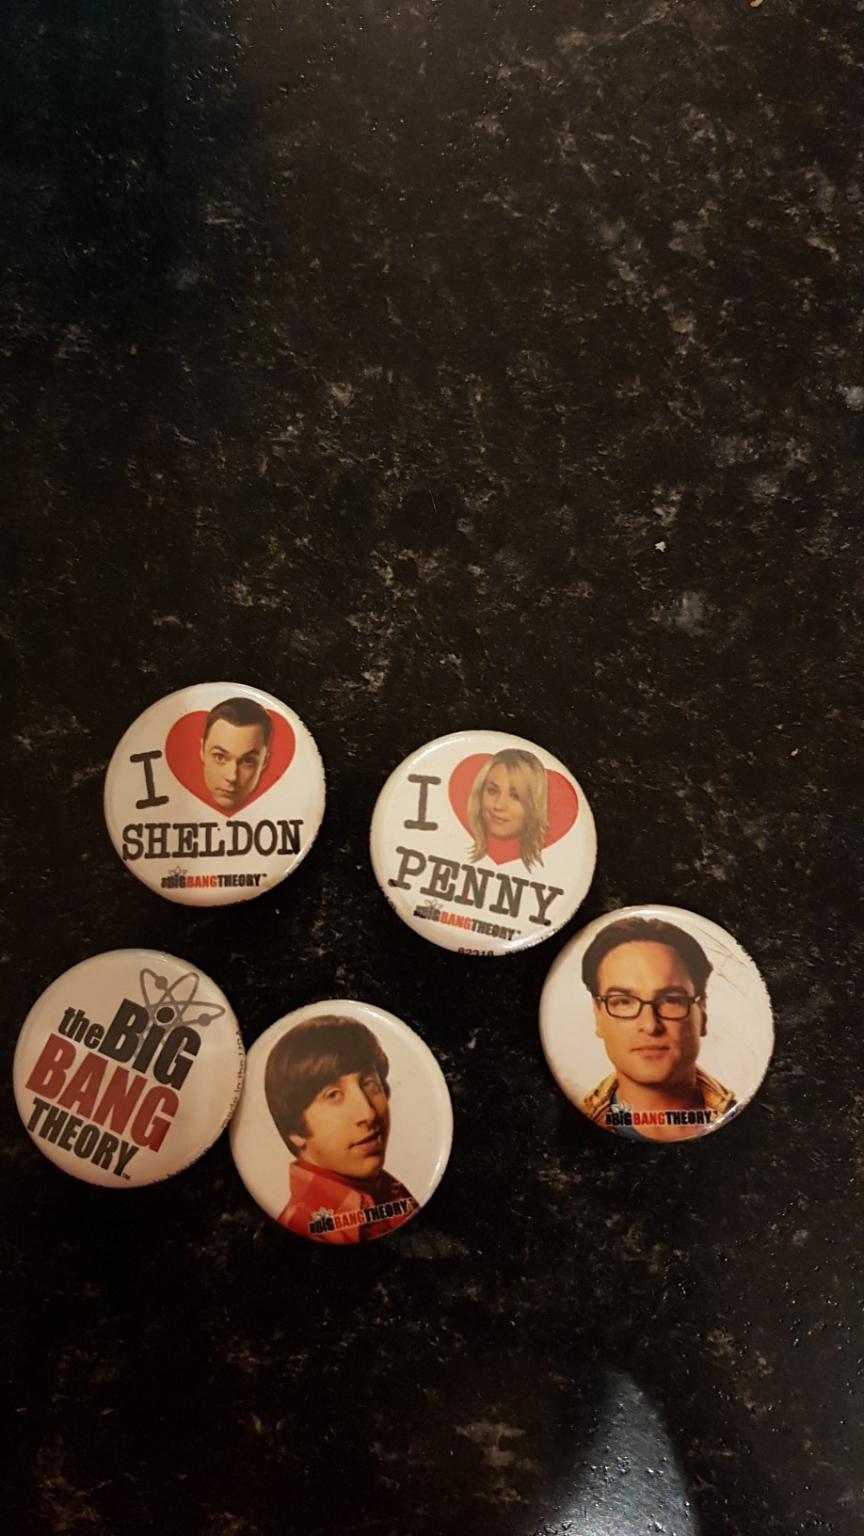 Big Bang Theory X5 Pin Badges In Ls14 Leeds For £2 00 For Sale Shpock